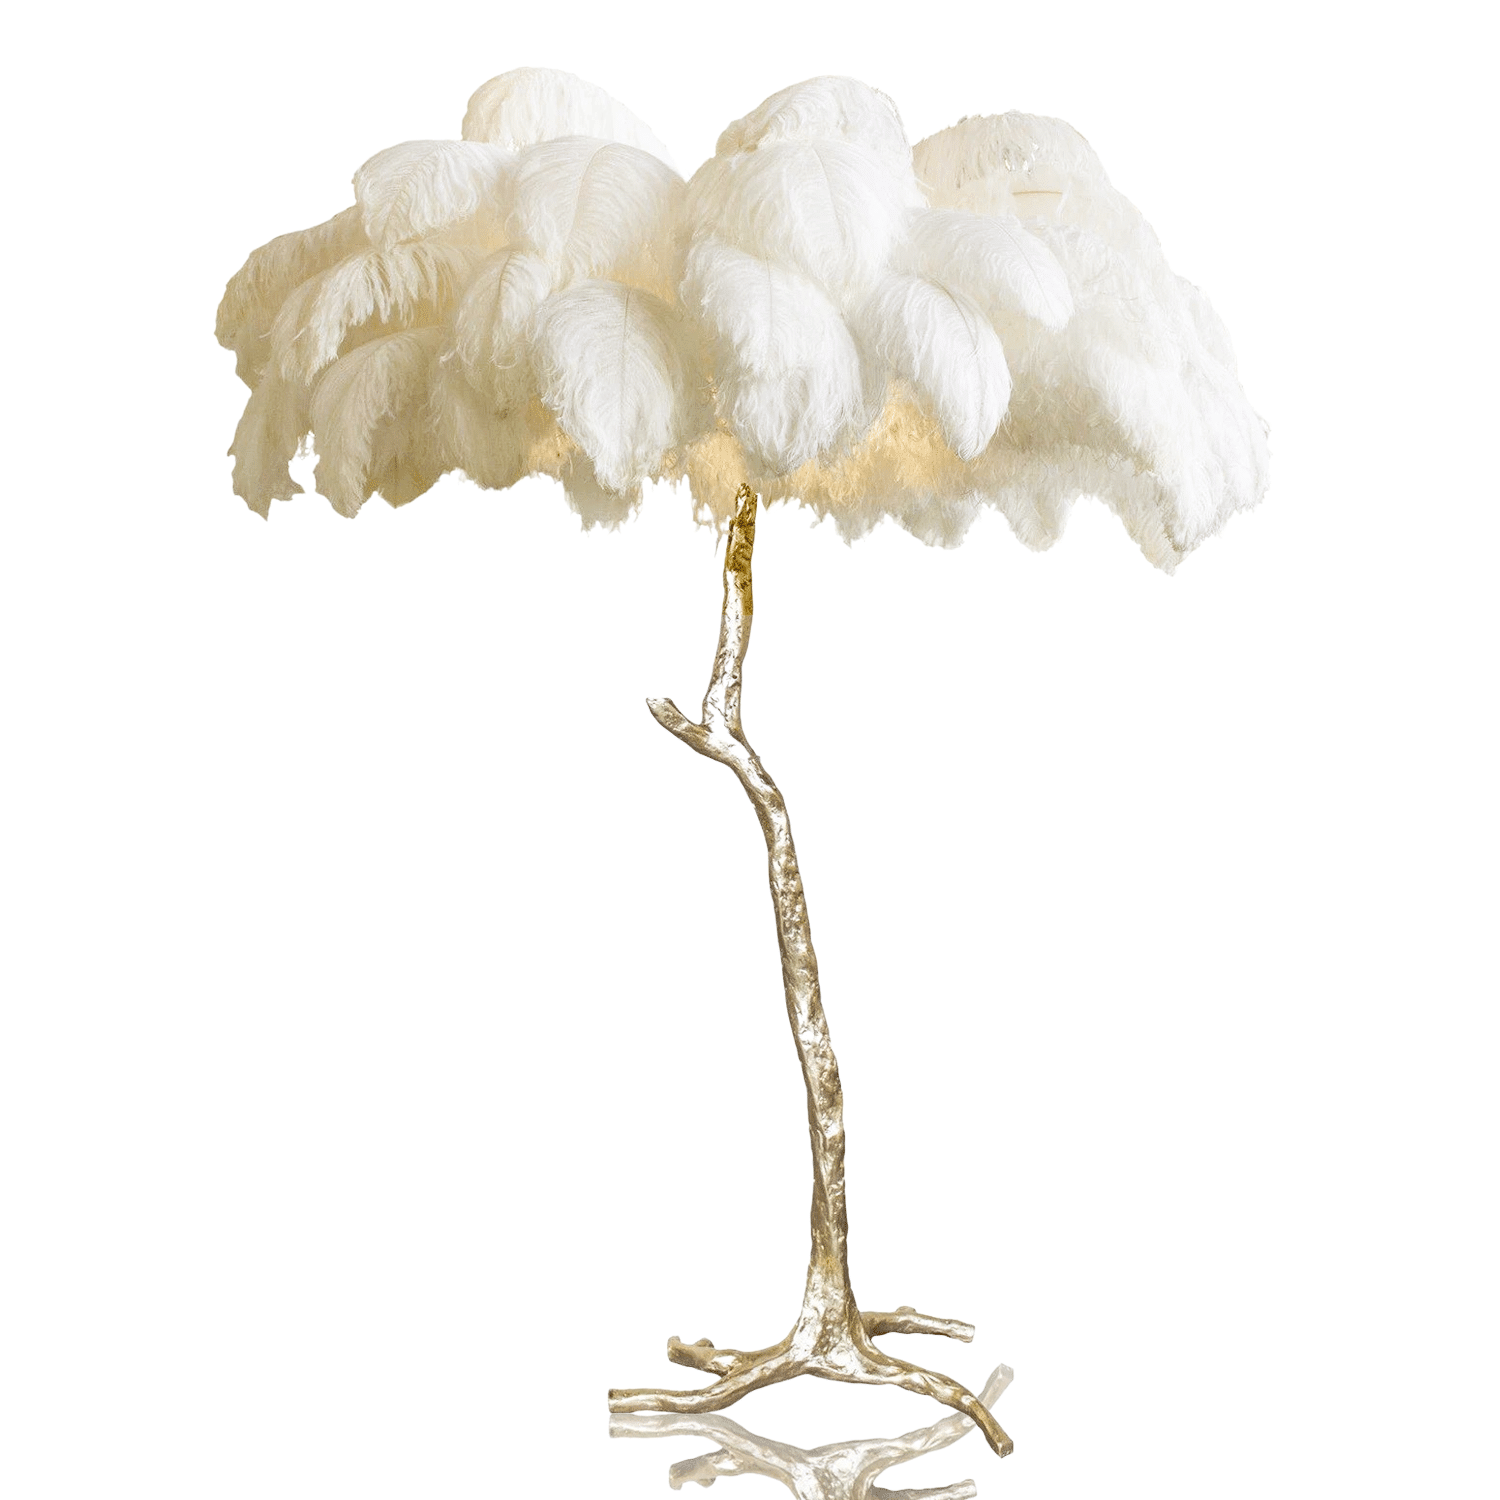 NATURAL FEATHER FLOOR LAMP